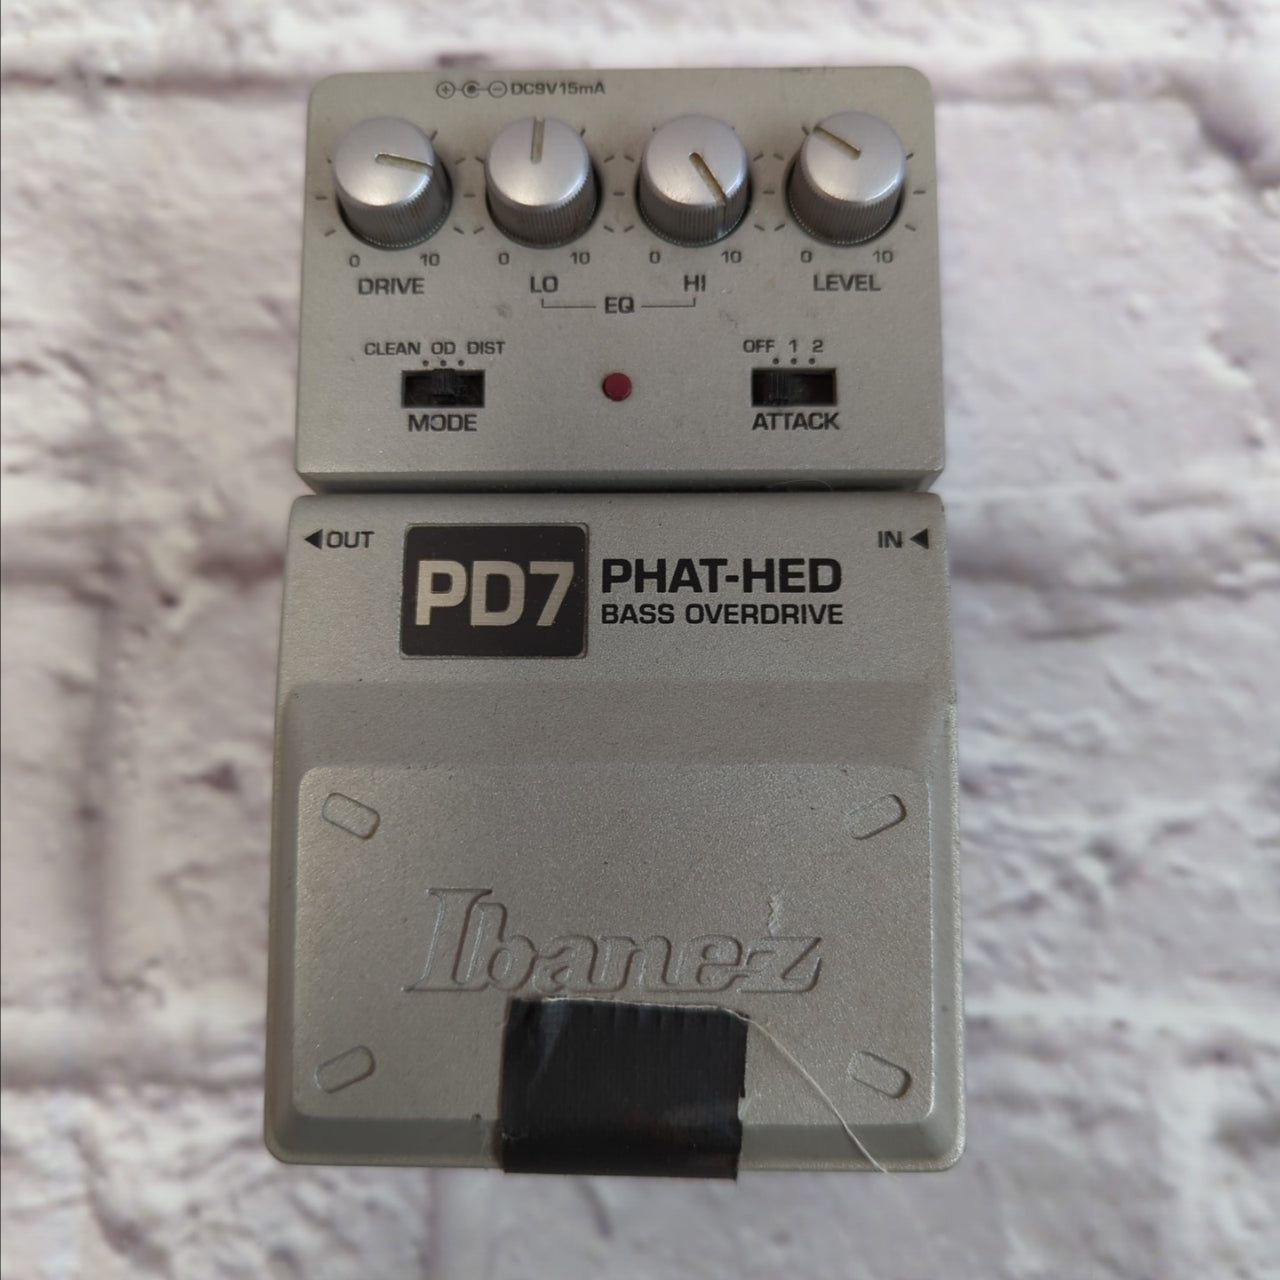 Ibanez PD7 Phat-Hed Bass Overdrive Pedal - Evolution Music